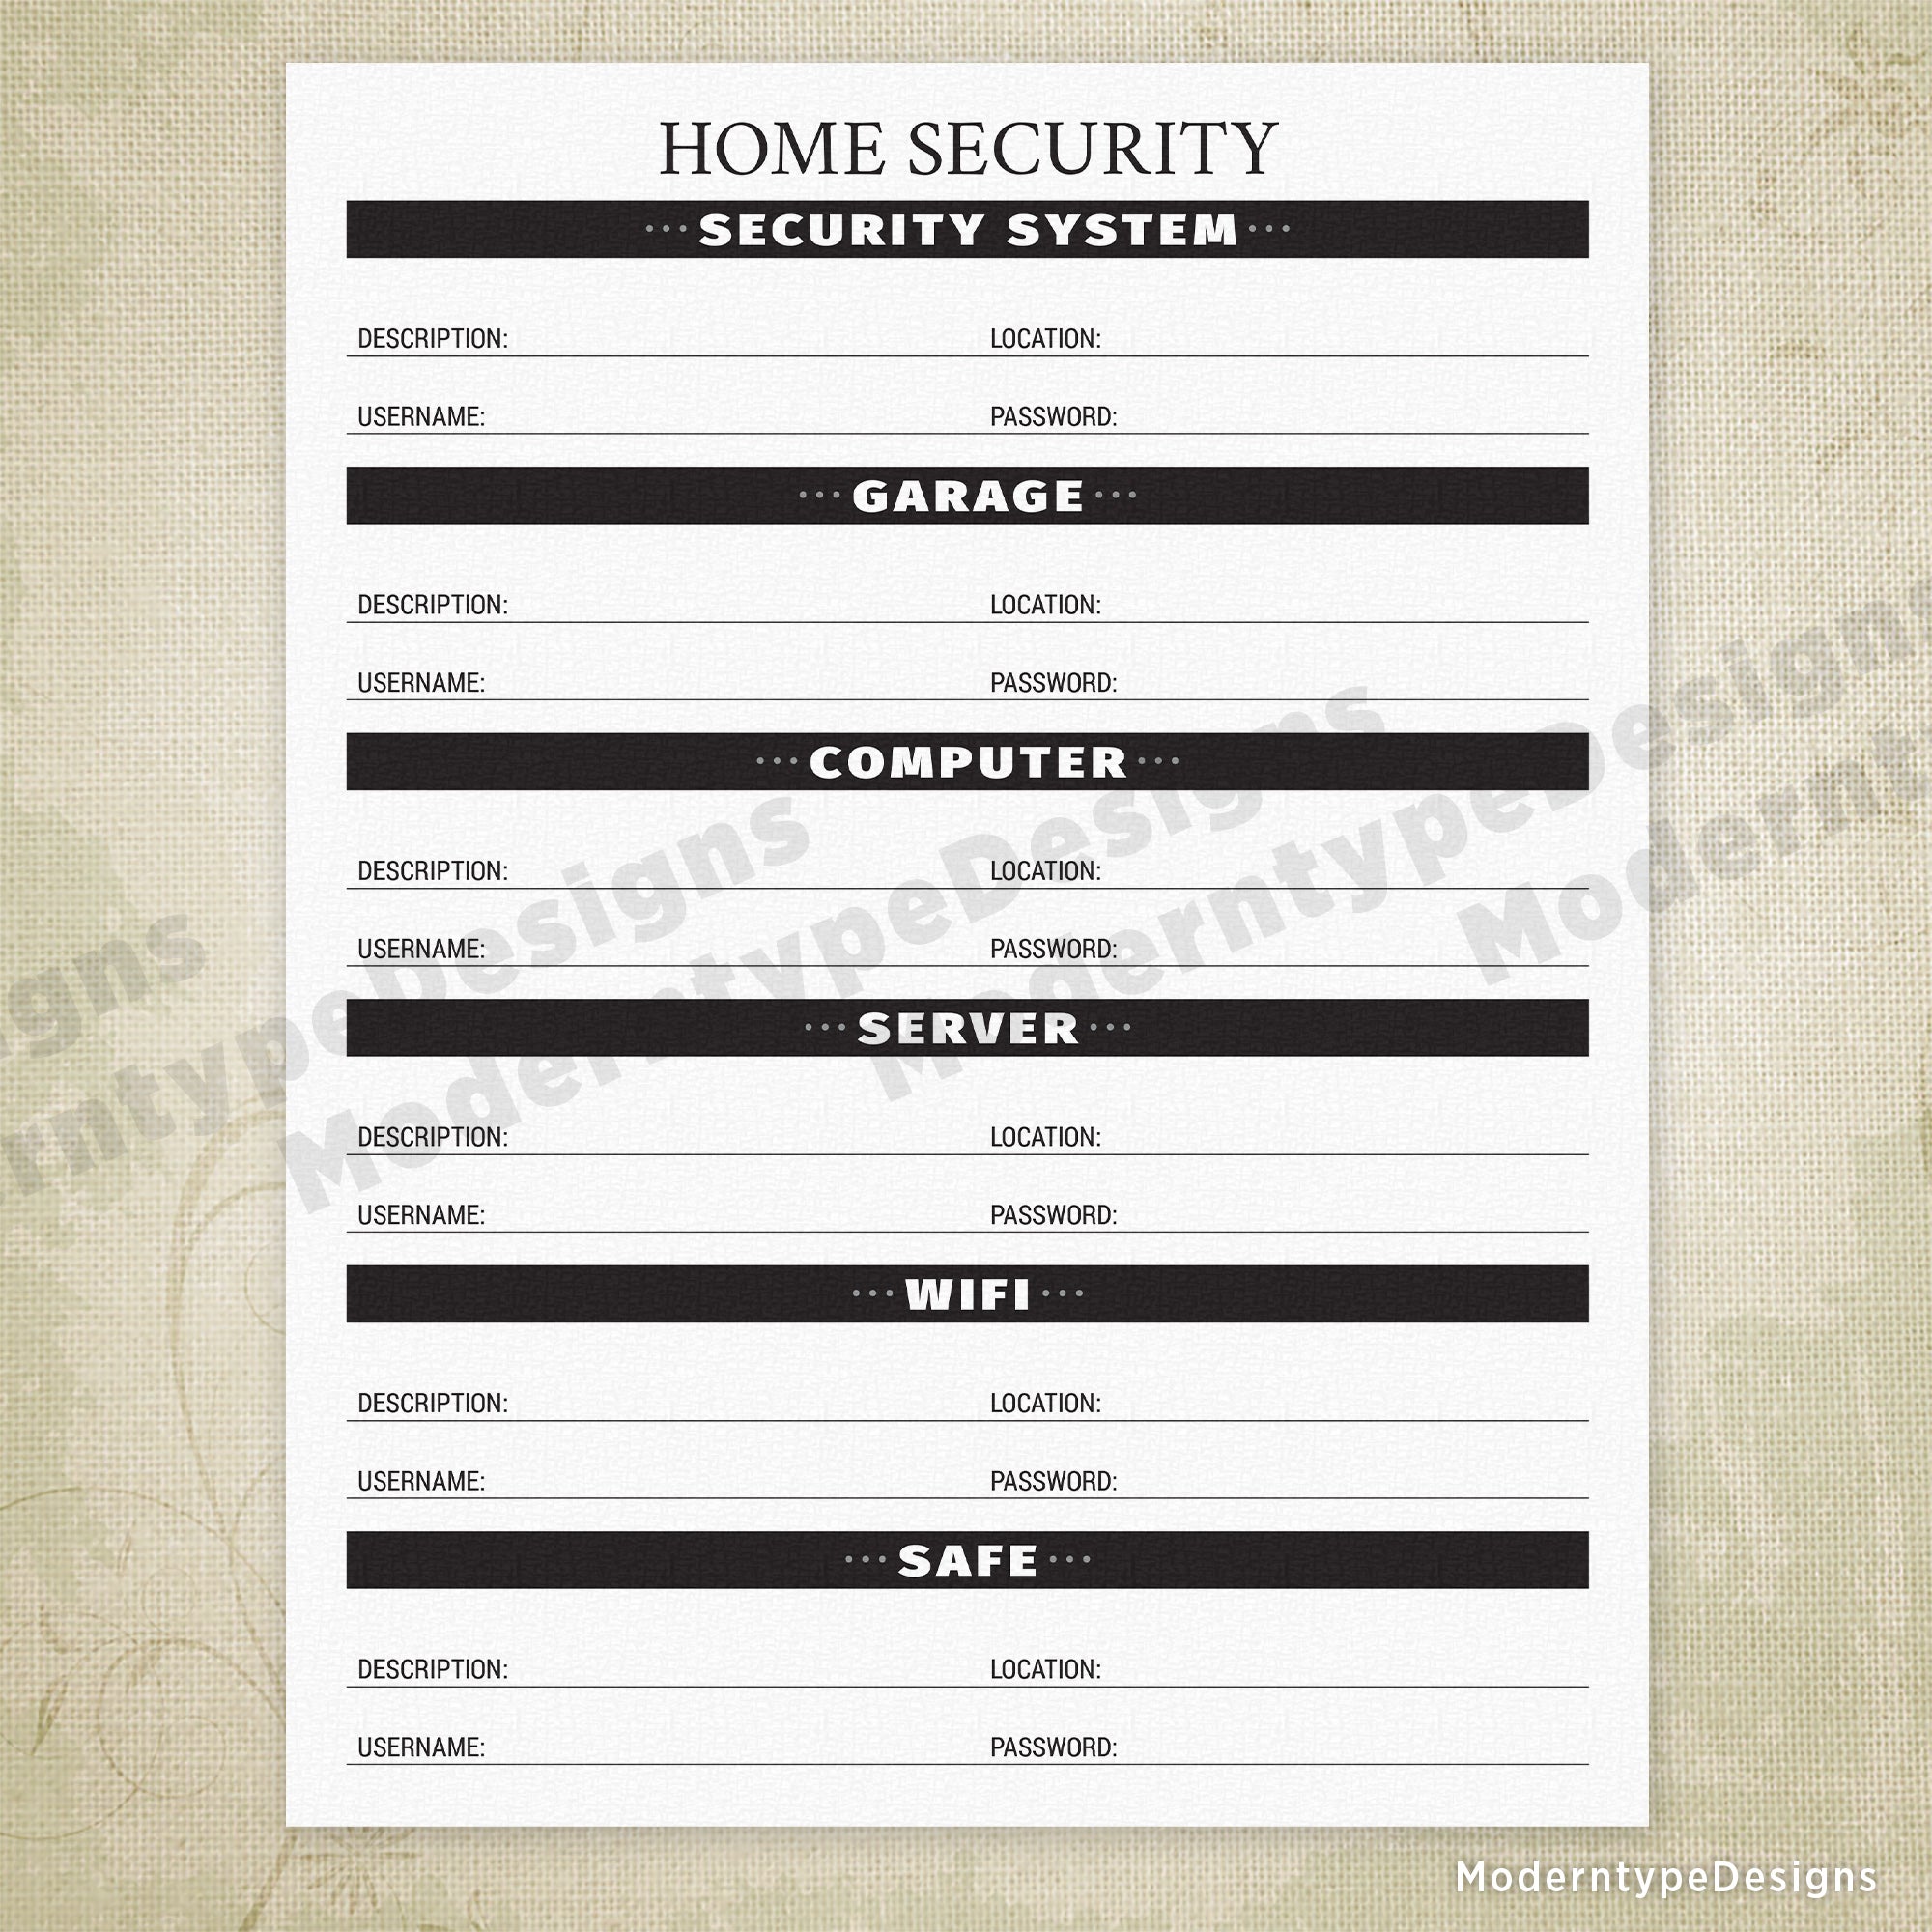 Home Security Printable - End of Life